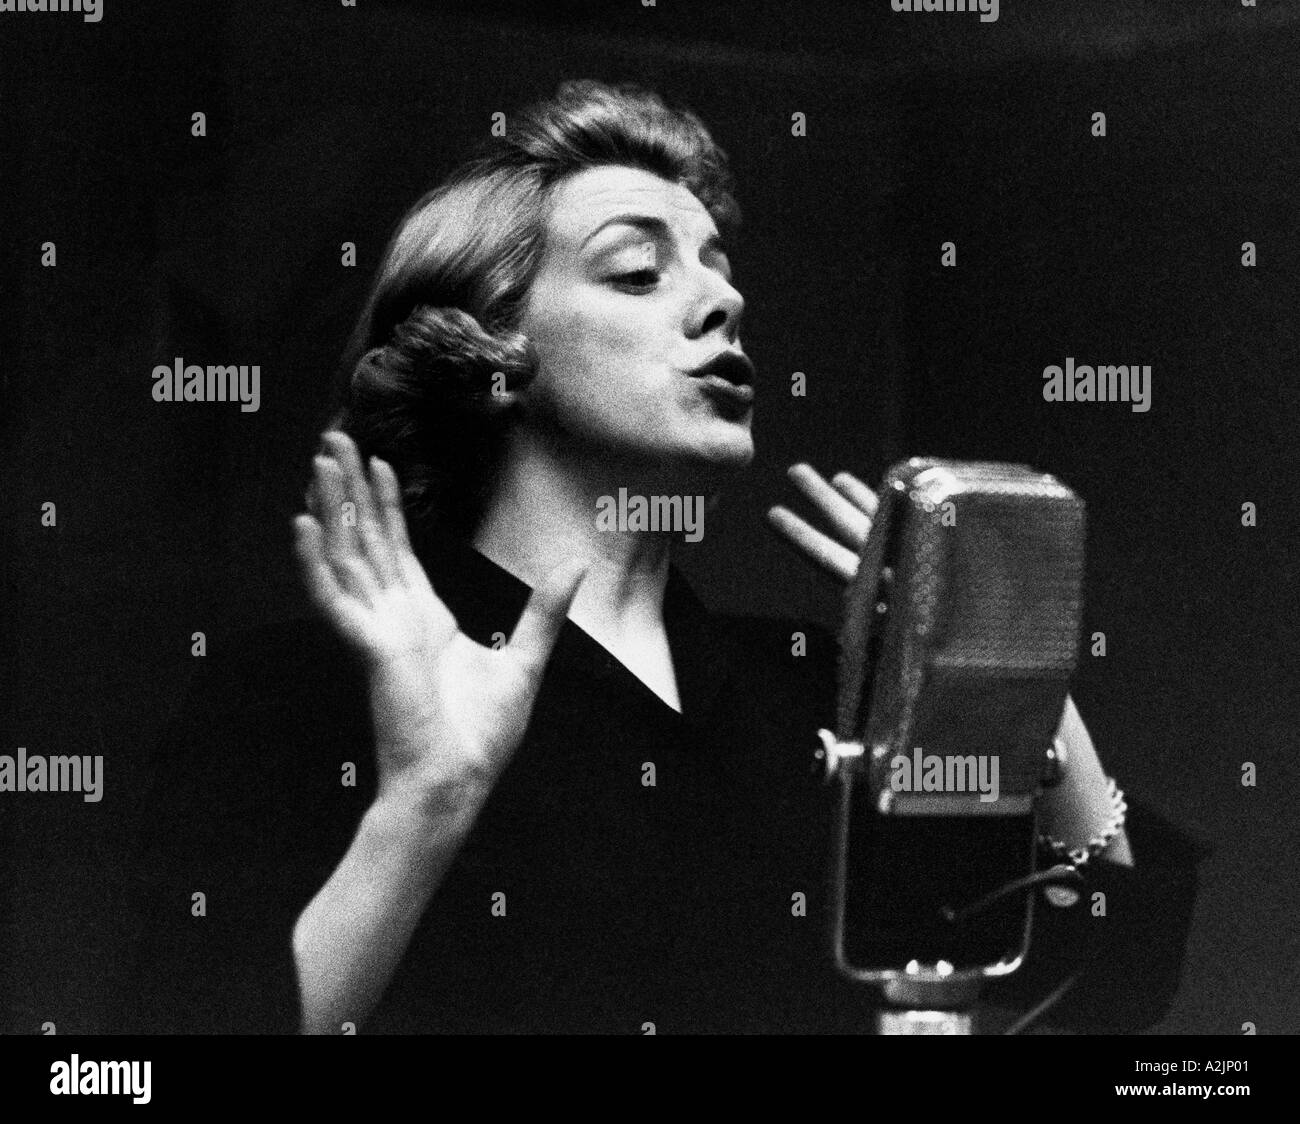 ROSEMARY CLOONEY American singer and actress 1928 2002 Stock Photo